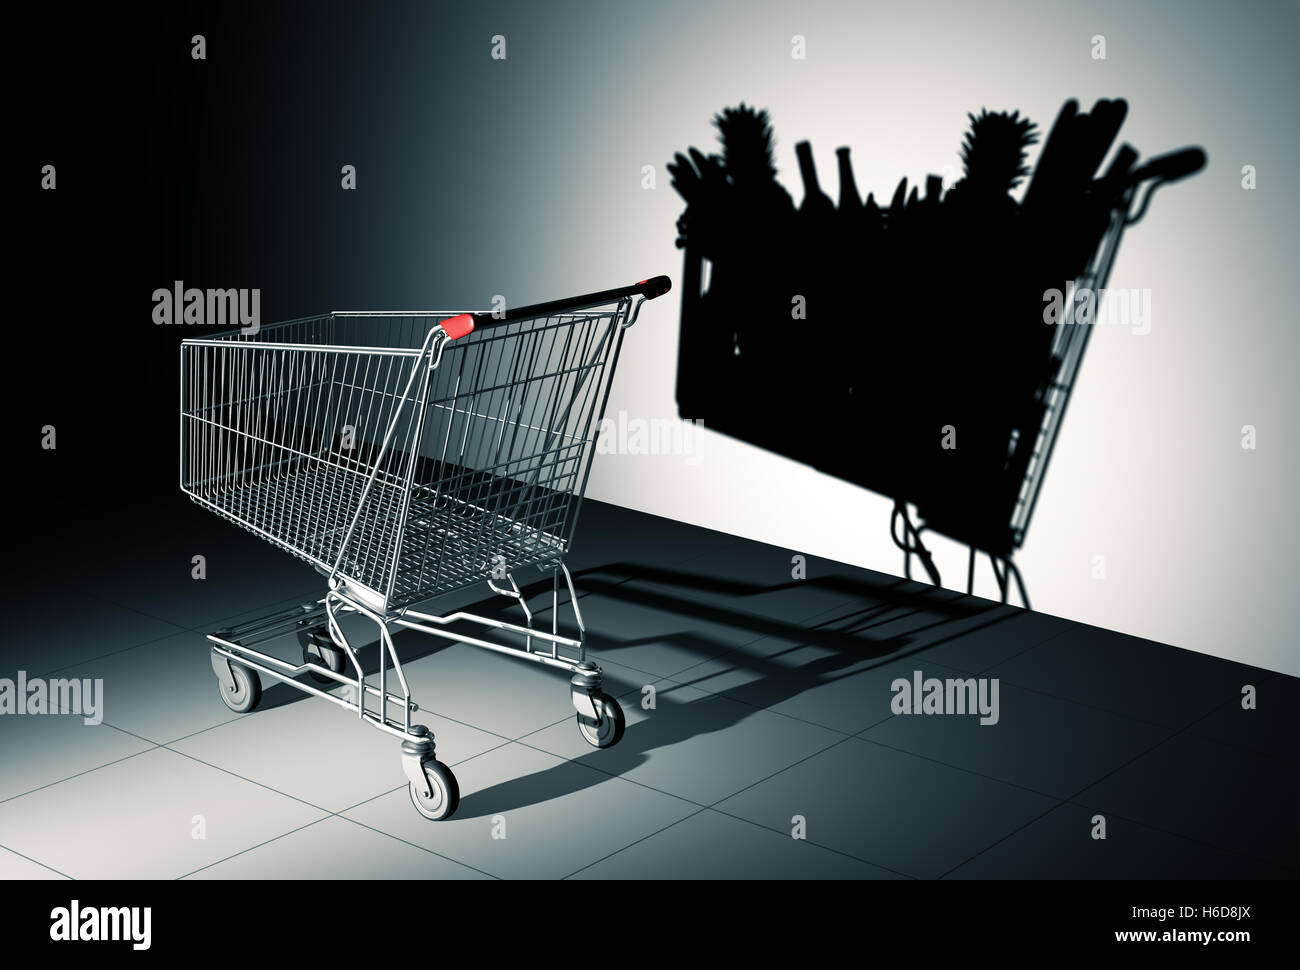 Empty Shopping Cart Cast Shadow On The Wall As Shopping Cart Full Of Food. 3D Illustration. Stock Photo